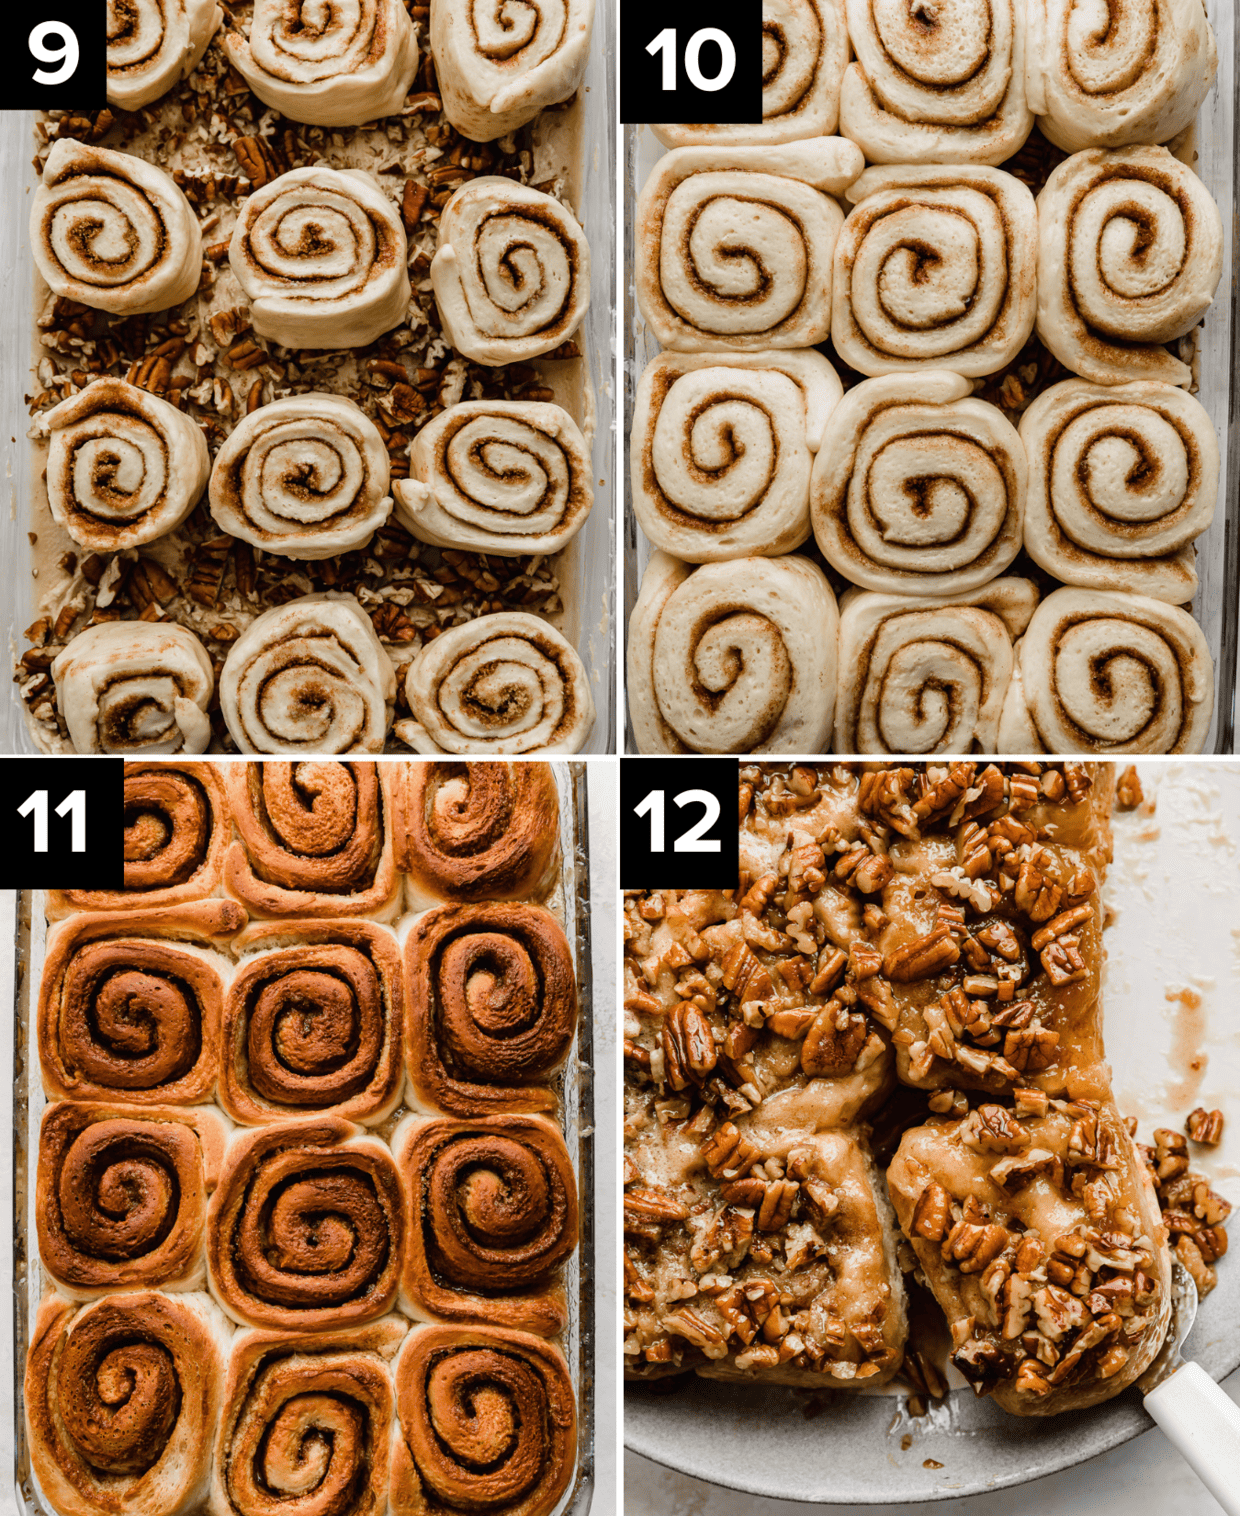 Raw Pecan Sticky Buns lined up in a glass rectangular baking dish, and other images show golden baked Pecan Sticky Buns, and pecan sticky buns turned upside down so now topped with caramel sticky pecans.